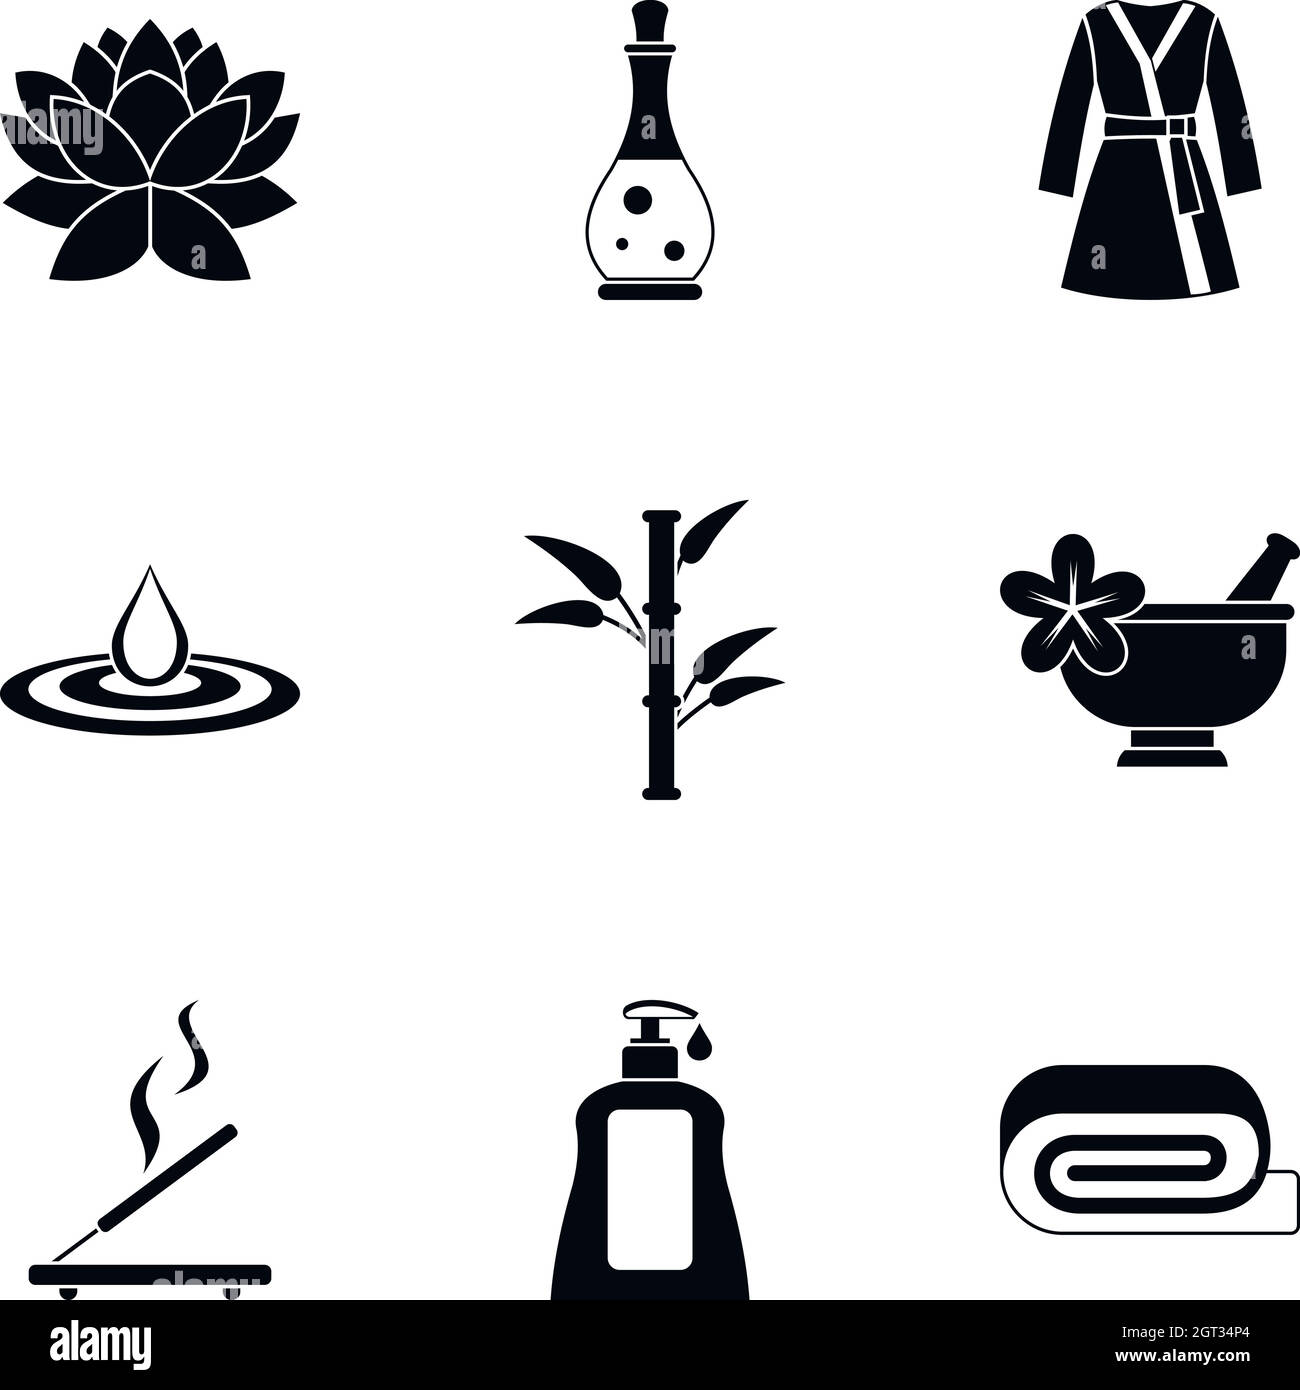 Relaxation icons set, simple style Stock Vector